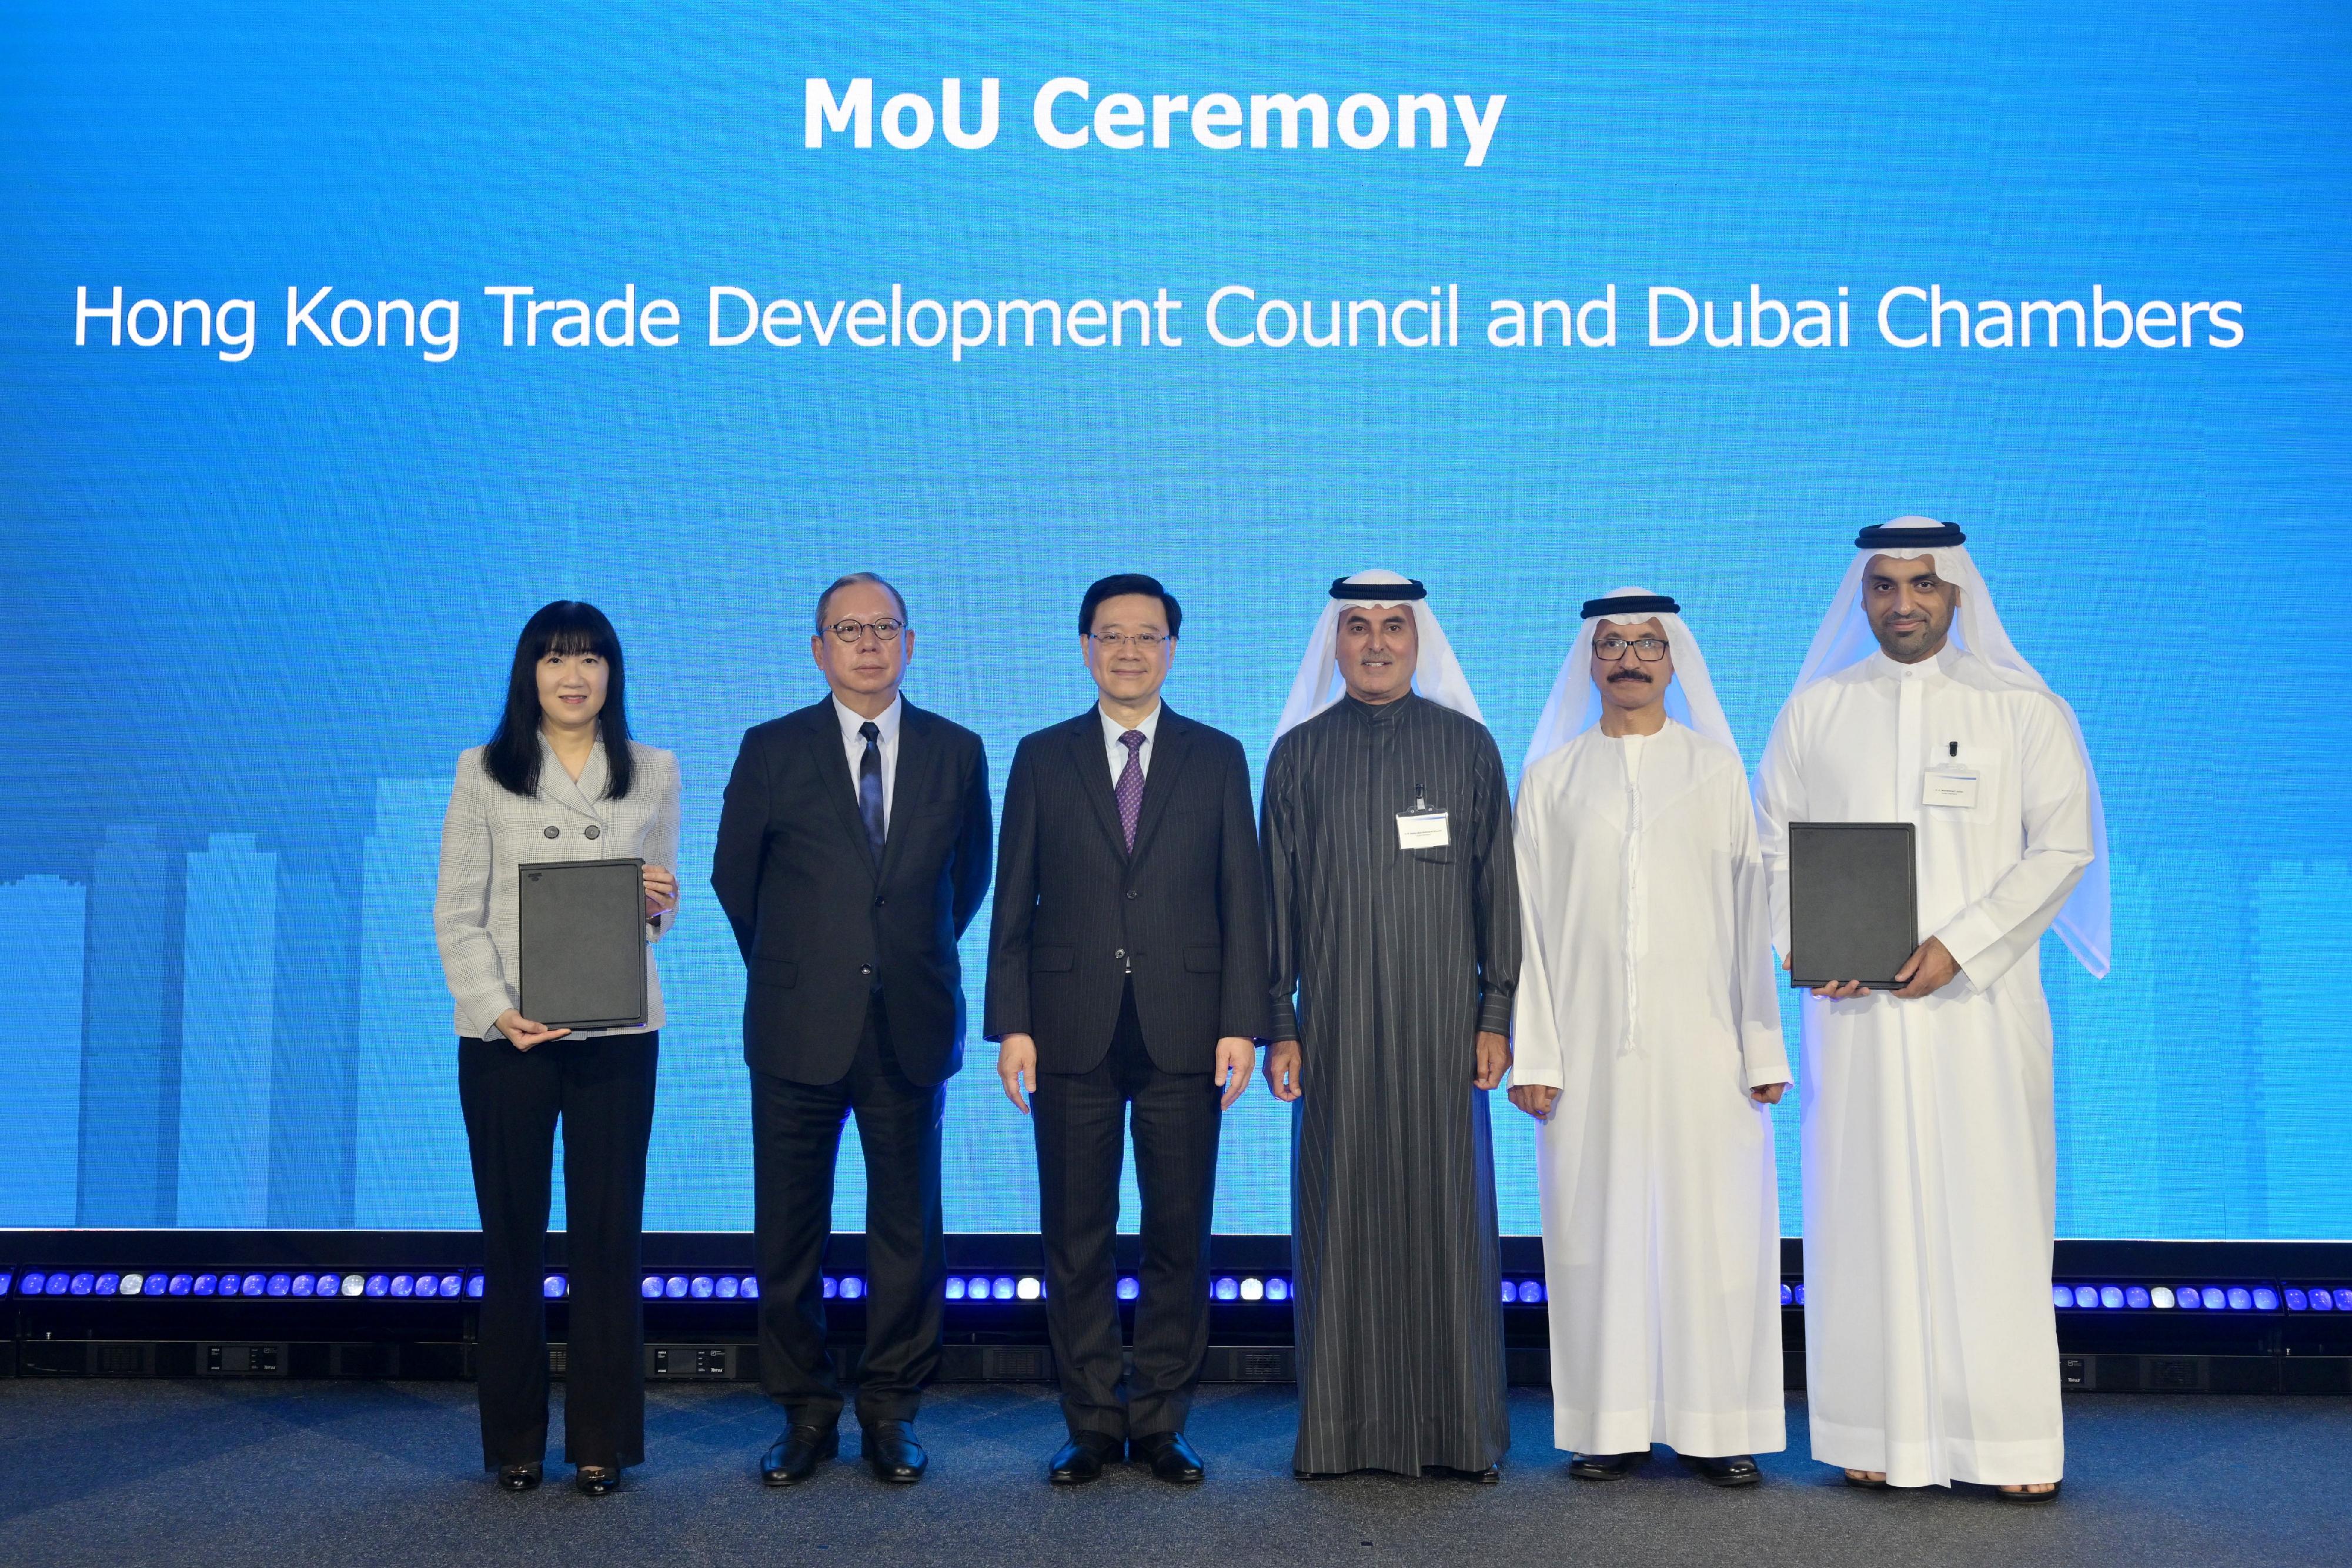 The Chief Executive, Mr John Lee, attended the UAE-Hong Kong Business Forum and Chinese New Year Gala Dinner in Dubai, the United Arab Emirates (UAE), today (February 8, Dubai time). Photo shows Mr Lee (third left); the Chairman of the Hong Kong Trade Development Council, Dr Peter Lam (second left); and the Chairman of Dubai Chambers, Mr Abdul-Aziz Abdulla Al Ghurair (third right) witnessing the exchange of Memorandum of Understanding between the Hong Kong Trade Development Council and the Dubai Chambers.